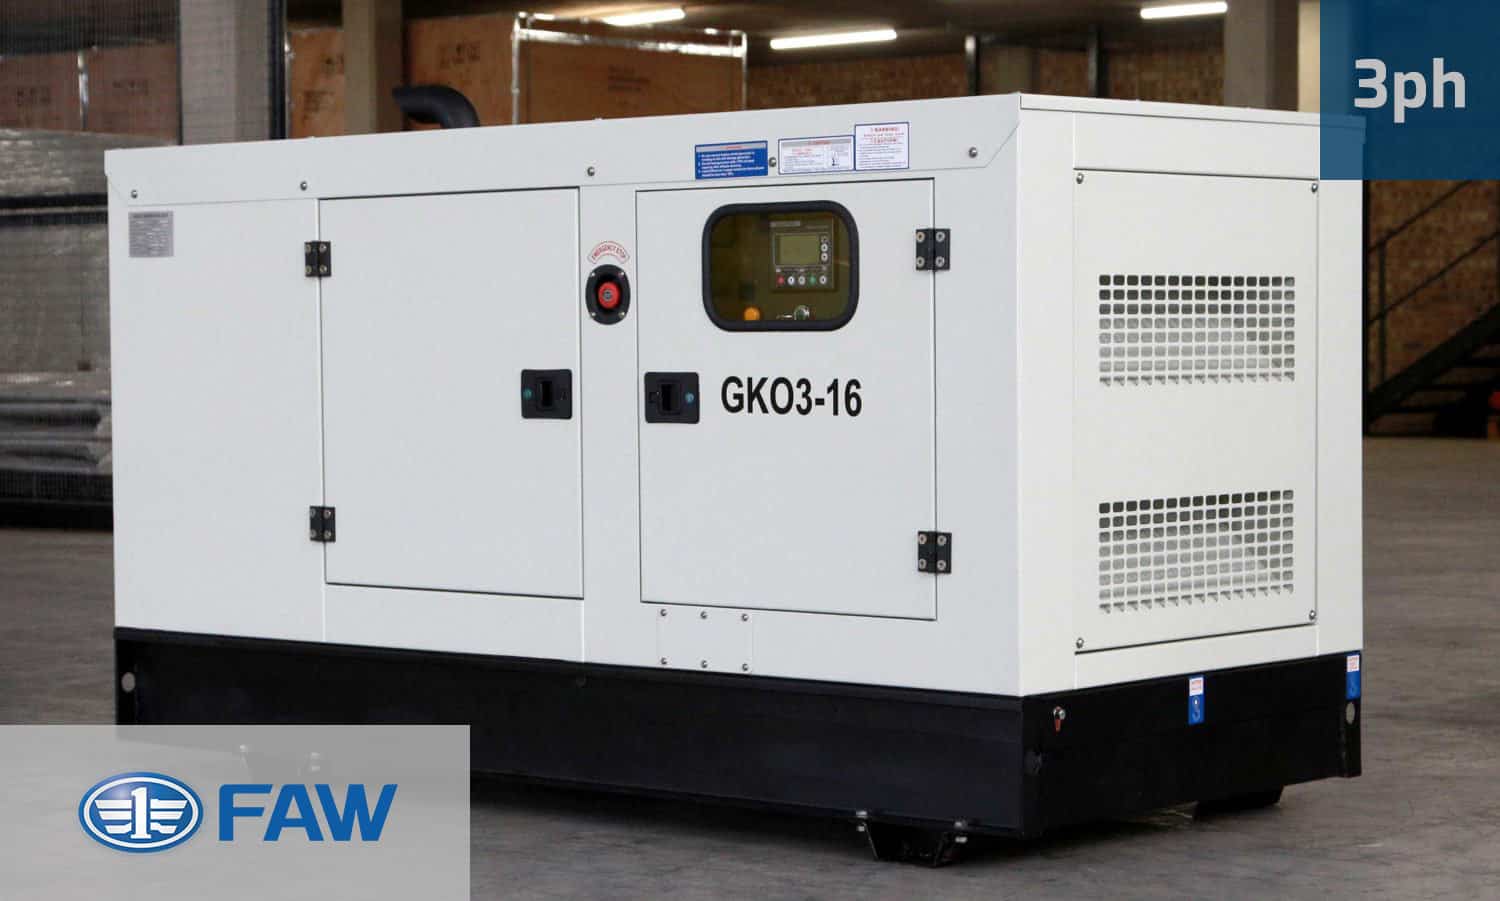 15kVa FAW Diesel Generator for Sale in South Africa. FAW Generator Prices. GKO3-16. Silent Generator.